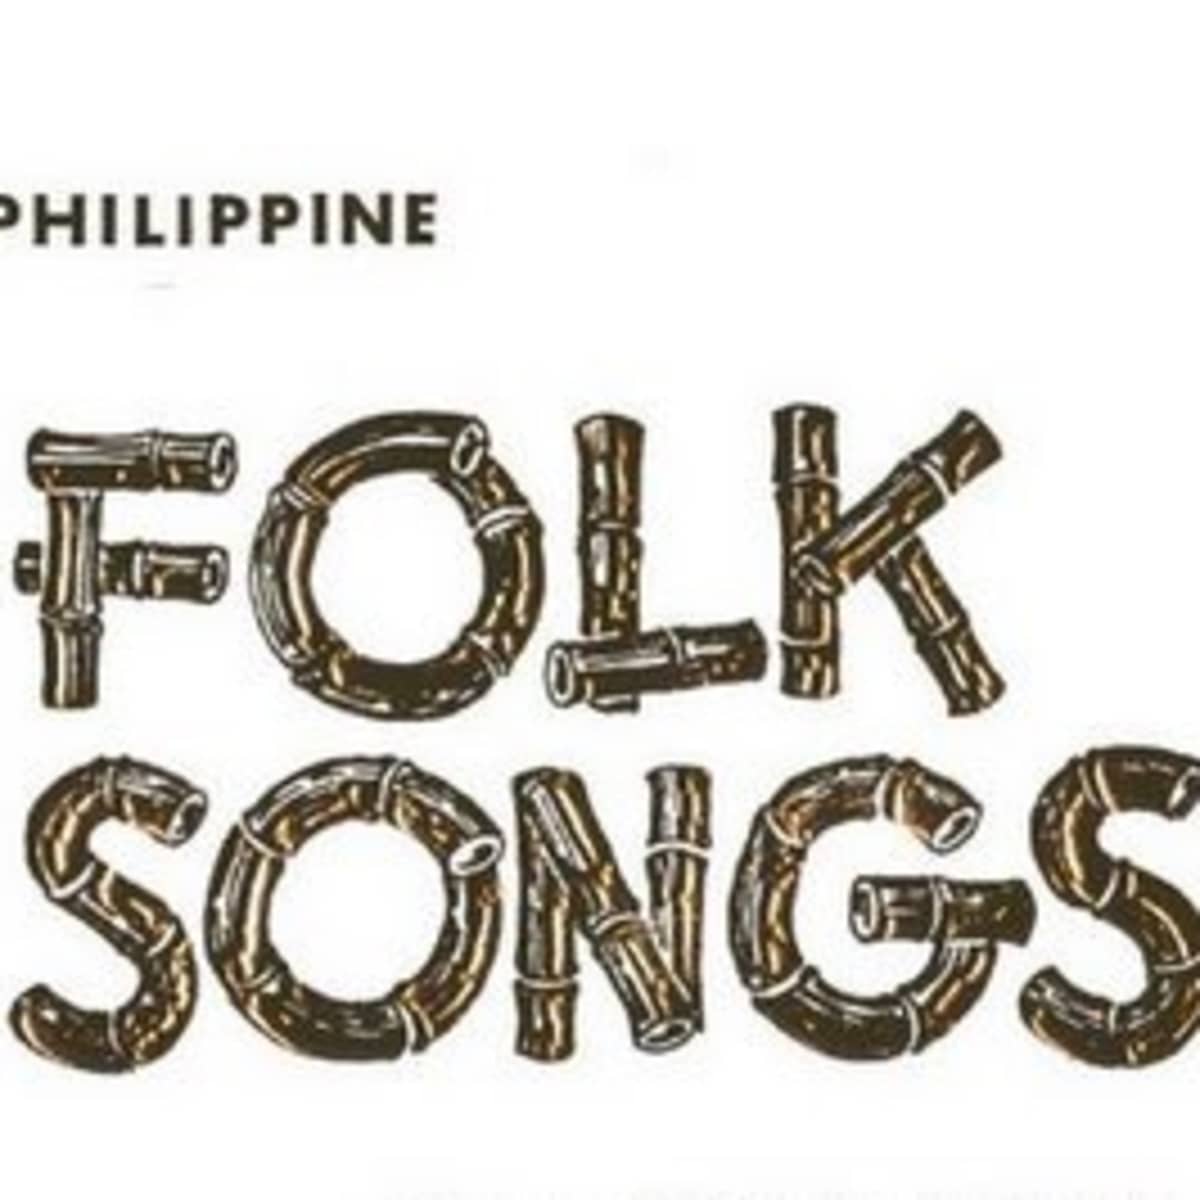 A List of Philippine Folk Songs With English Translations - HubPages